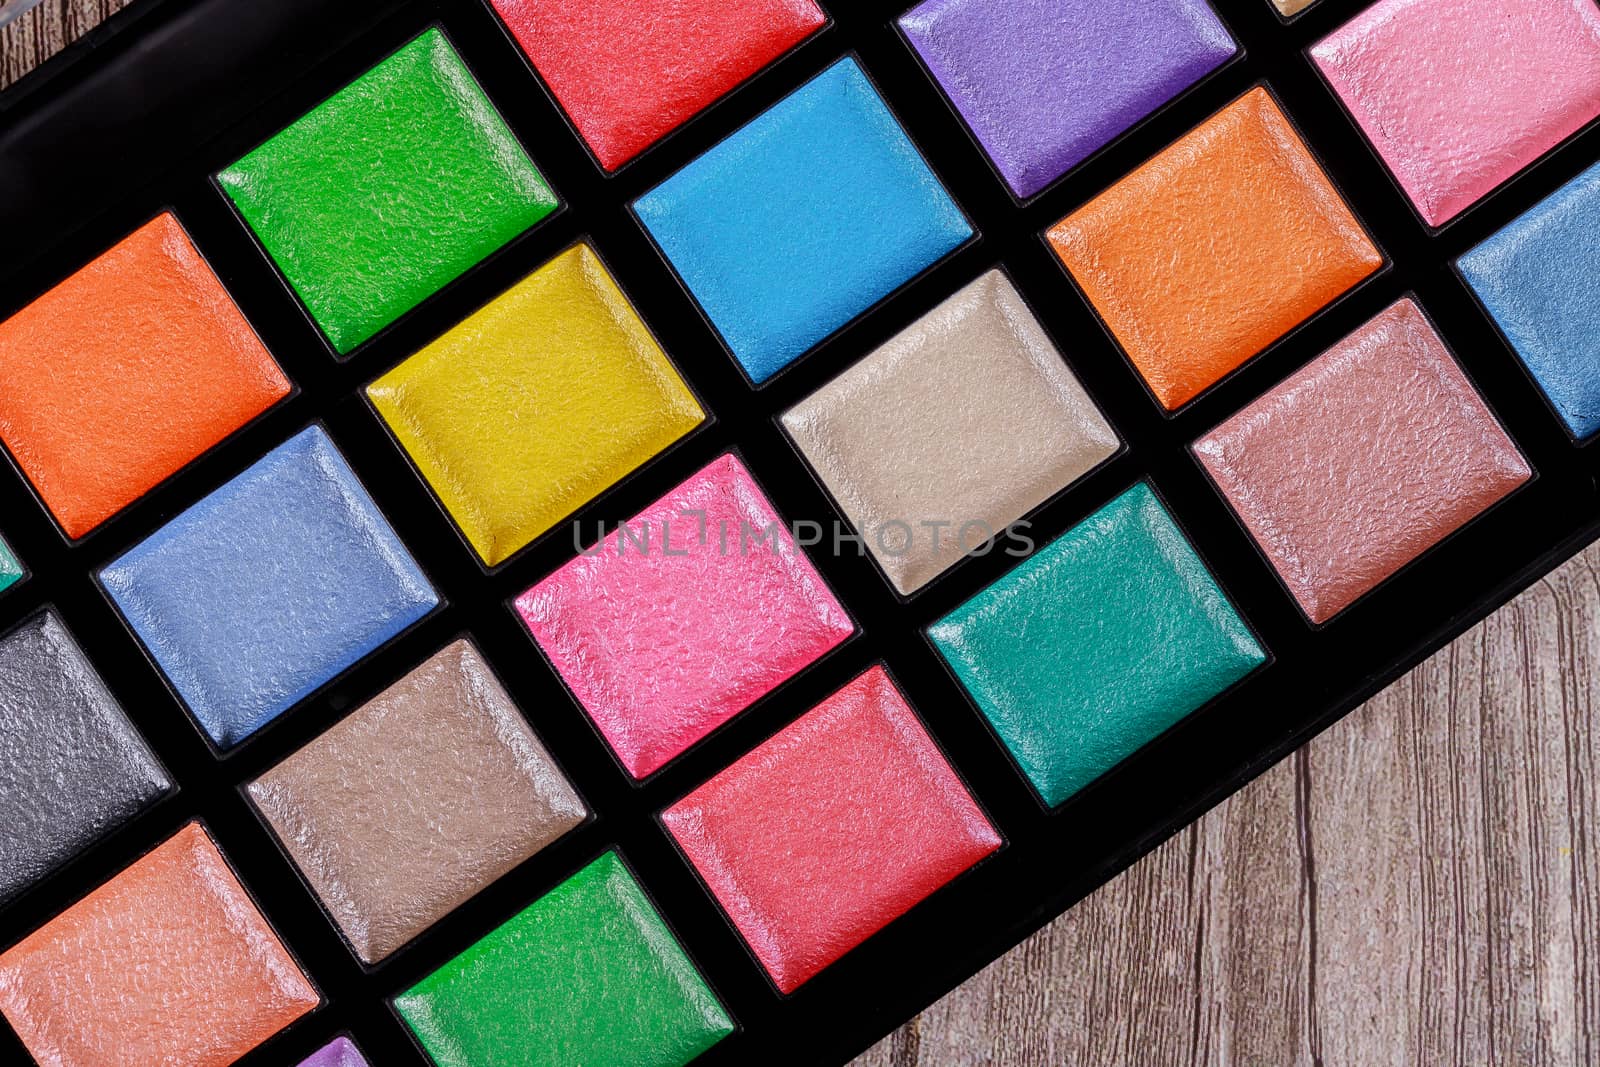 Colorful makeup palette, eye shadow in box. by ungvar